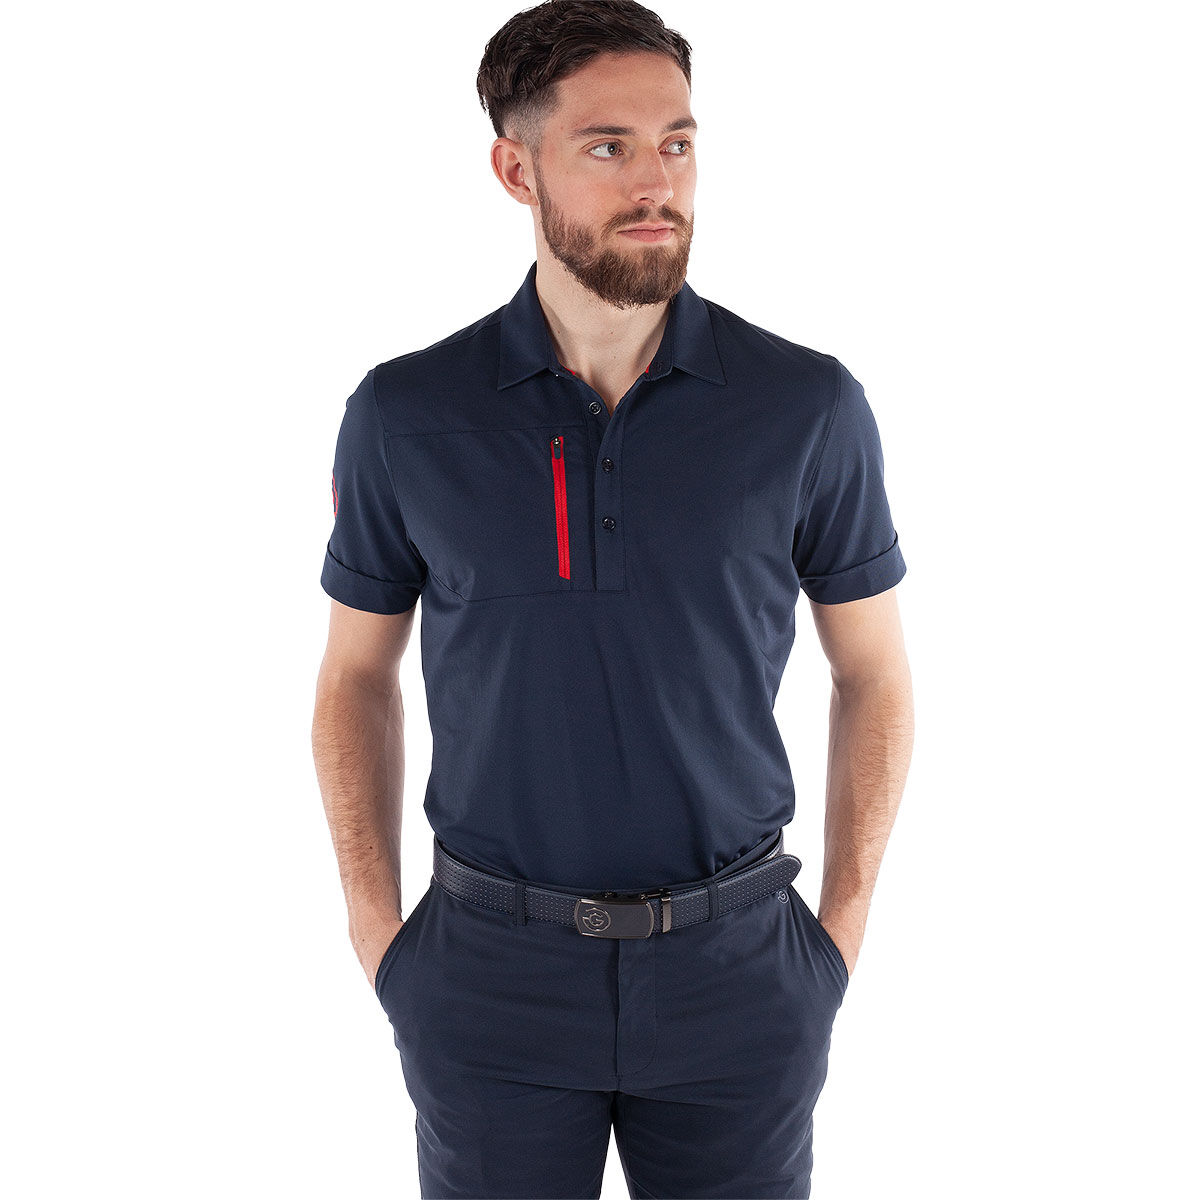 Galvin Green Mens Navy Blue and Red Comfortable Morton Golf Polo Shirt, Size: Small | American Golf von Galvin Green